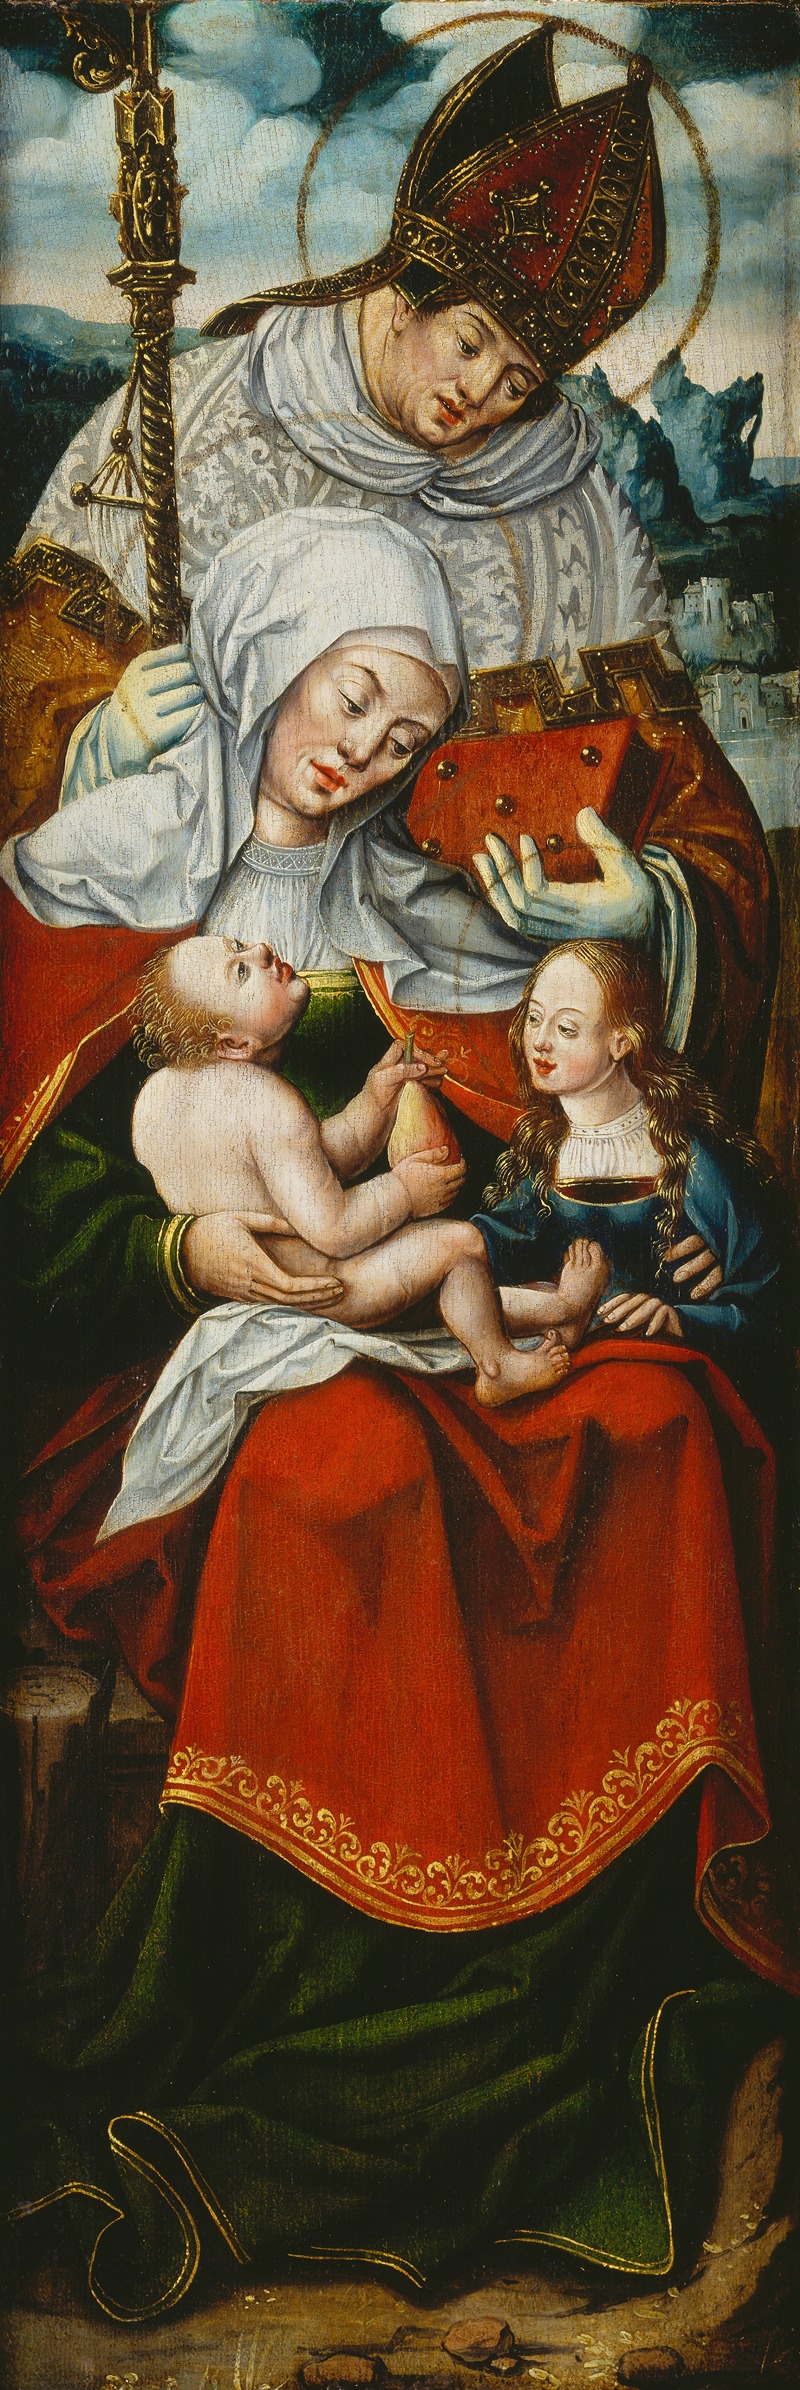 Anton Woensam - St Anne, the Virgin and Child with a Bishop Saint left wing of an altarpiece